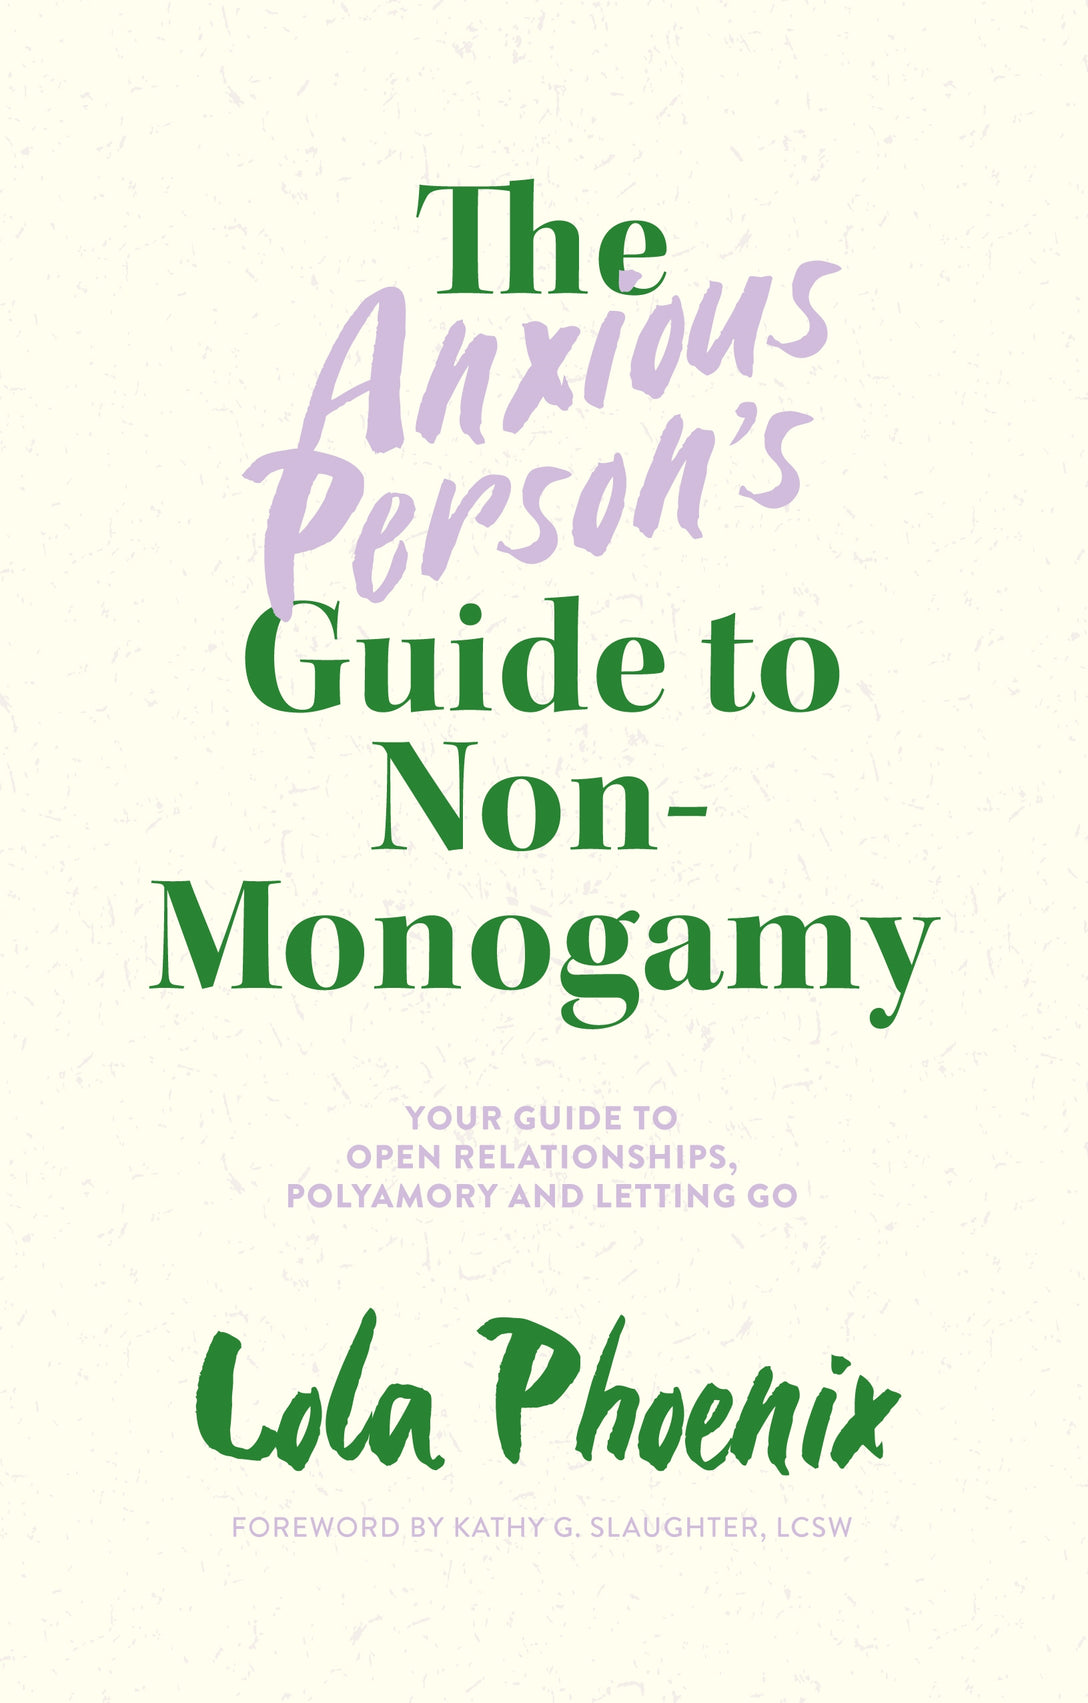 The Anxious Person’s Guide to Non-Monogamy by Lola Phoenix, Kathy G. Slaughter, LCSW